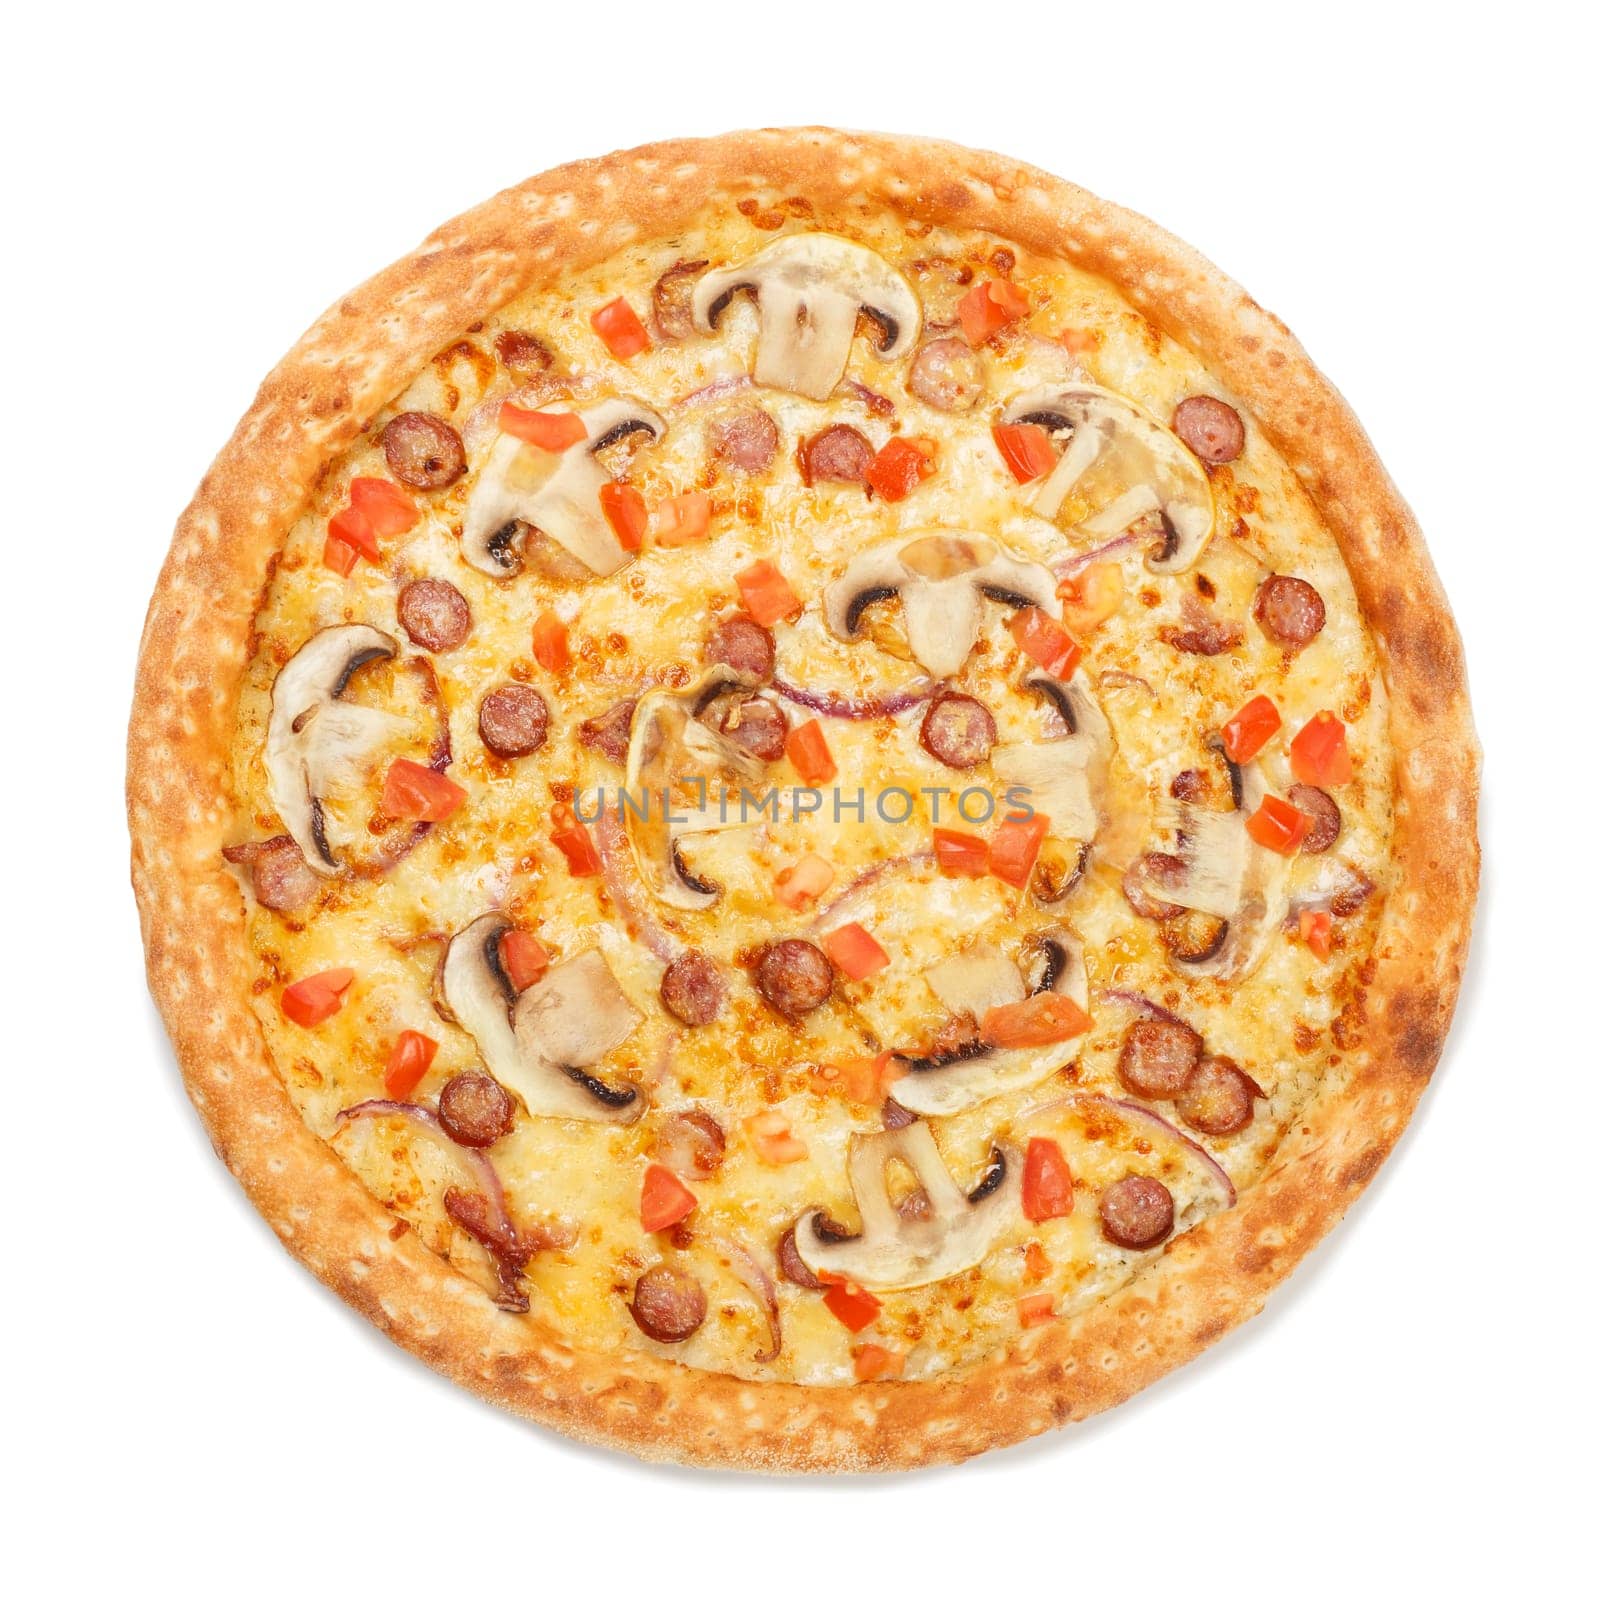 Delicious italian pizza with sausages, mushrooms, vegetables and cheeseisolated on white background. Top view.